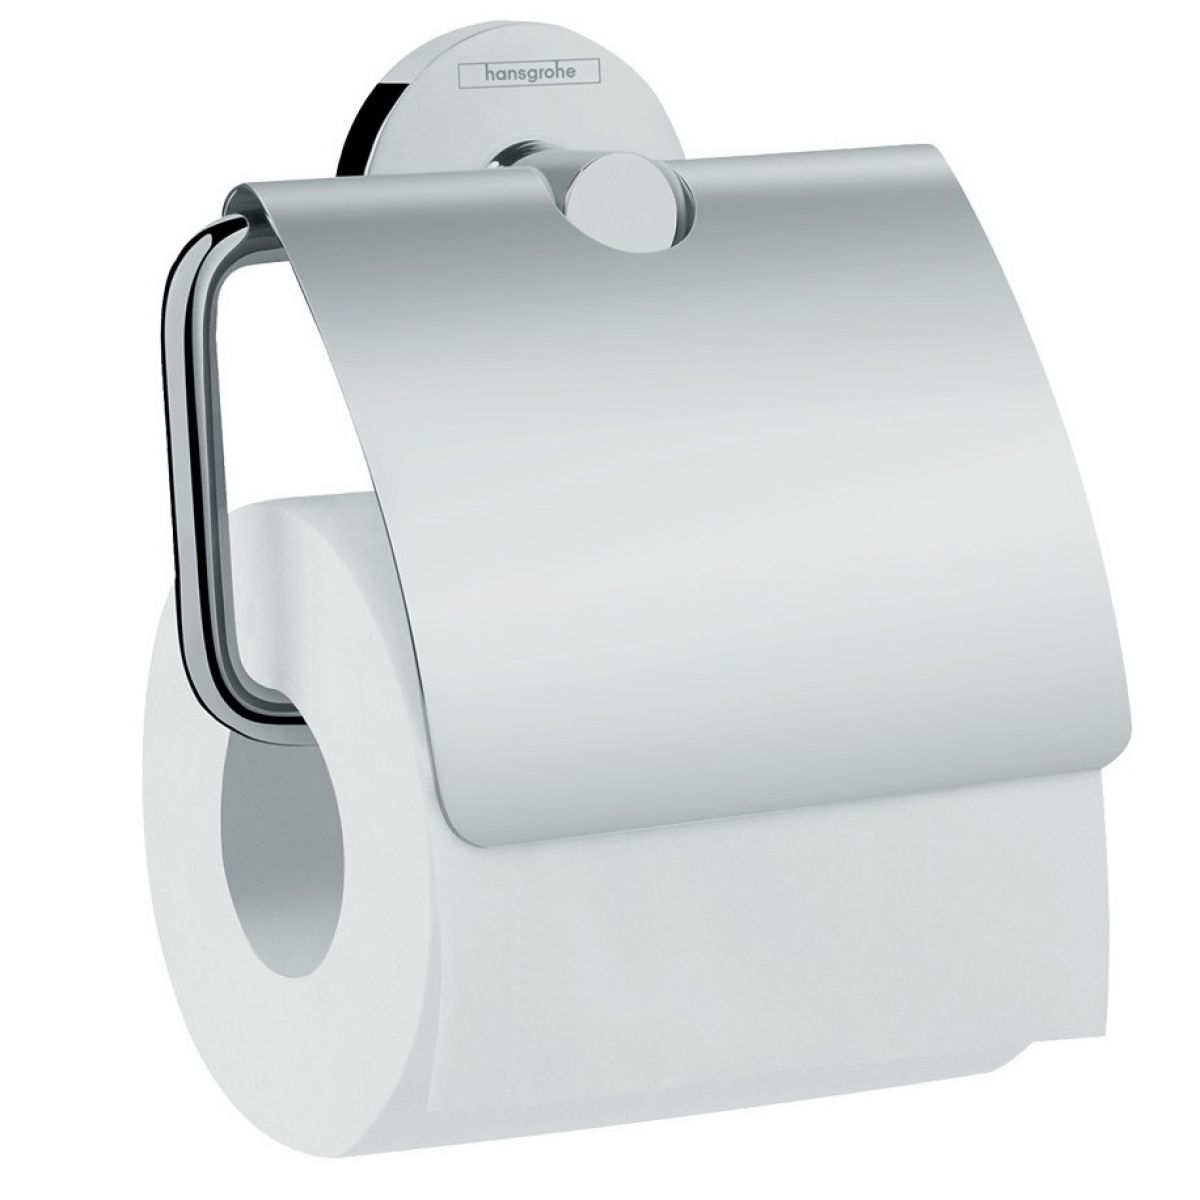 Hansgrohe Logis Universal Toilet Roll Holder with Cover